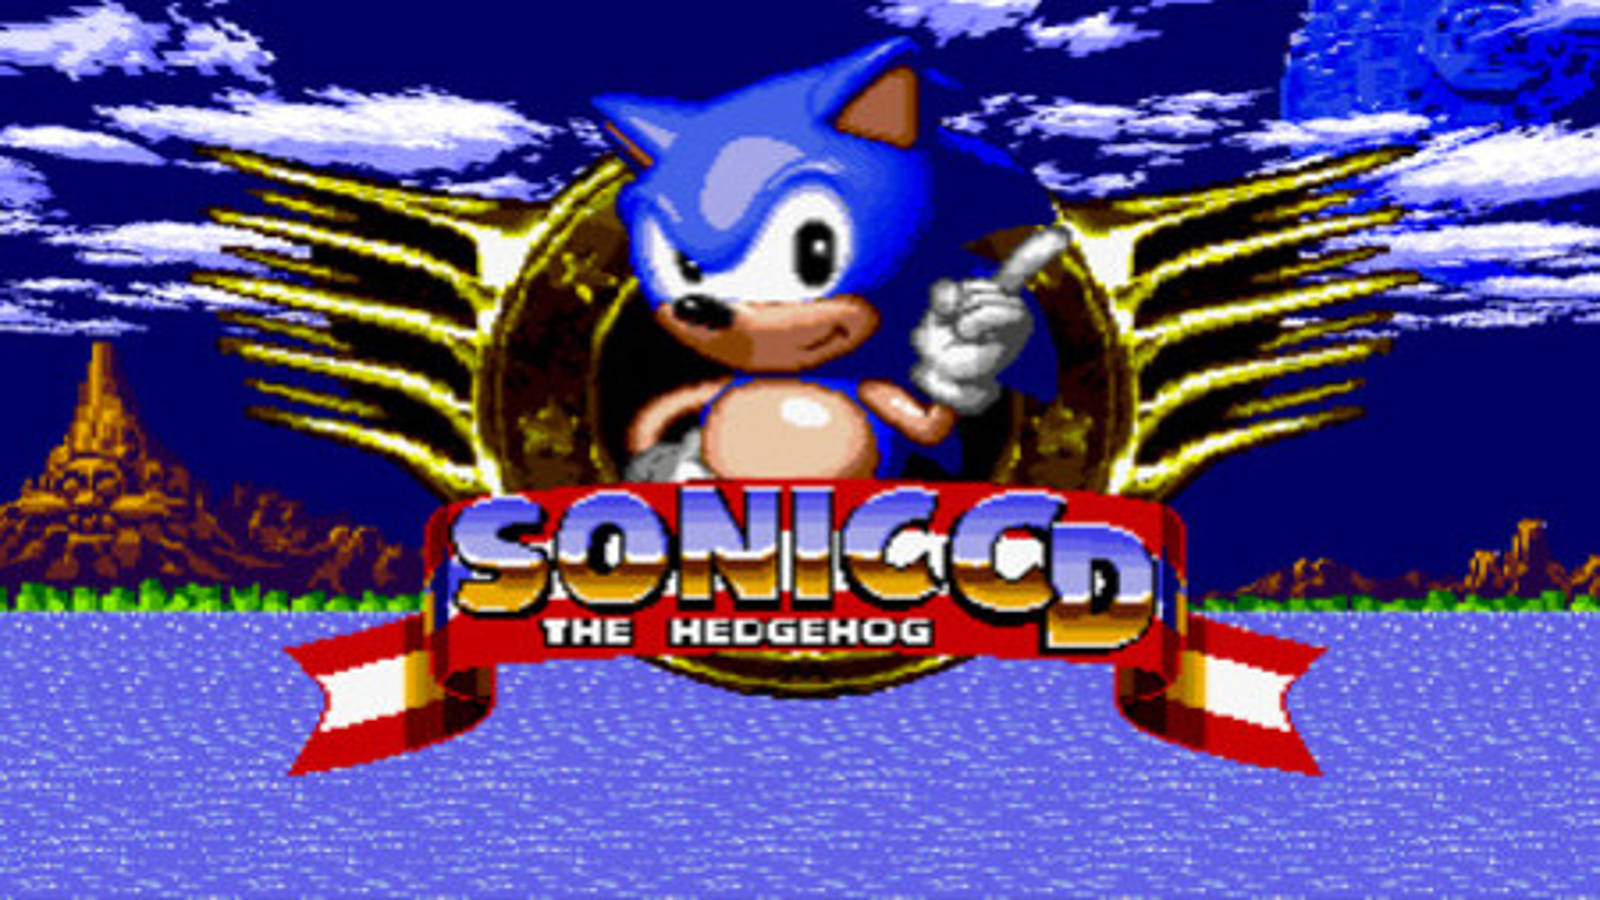 Open Assets] - Sonic 2006 - Extended Port